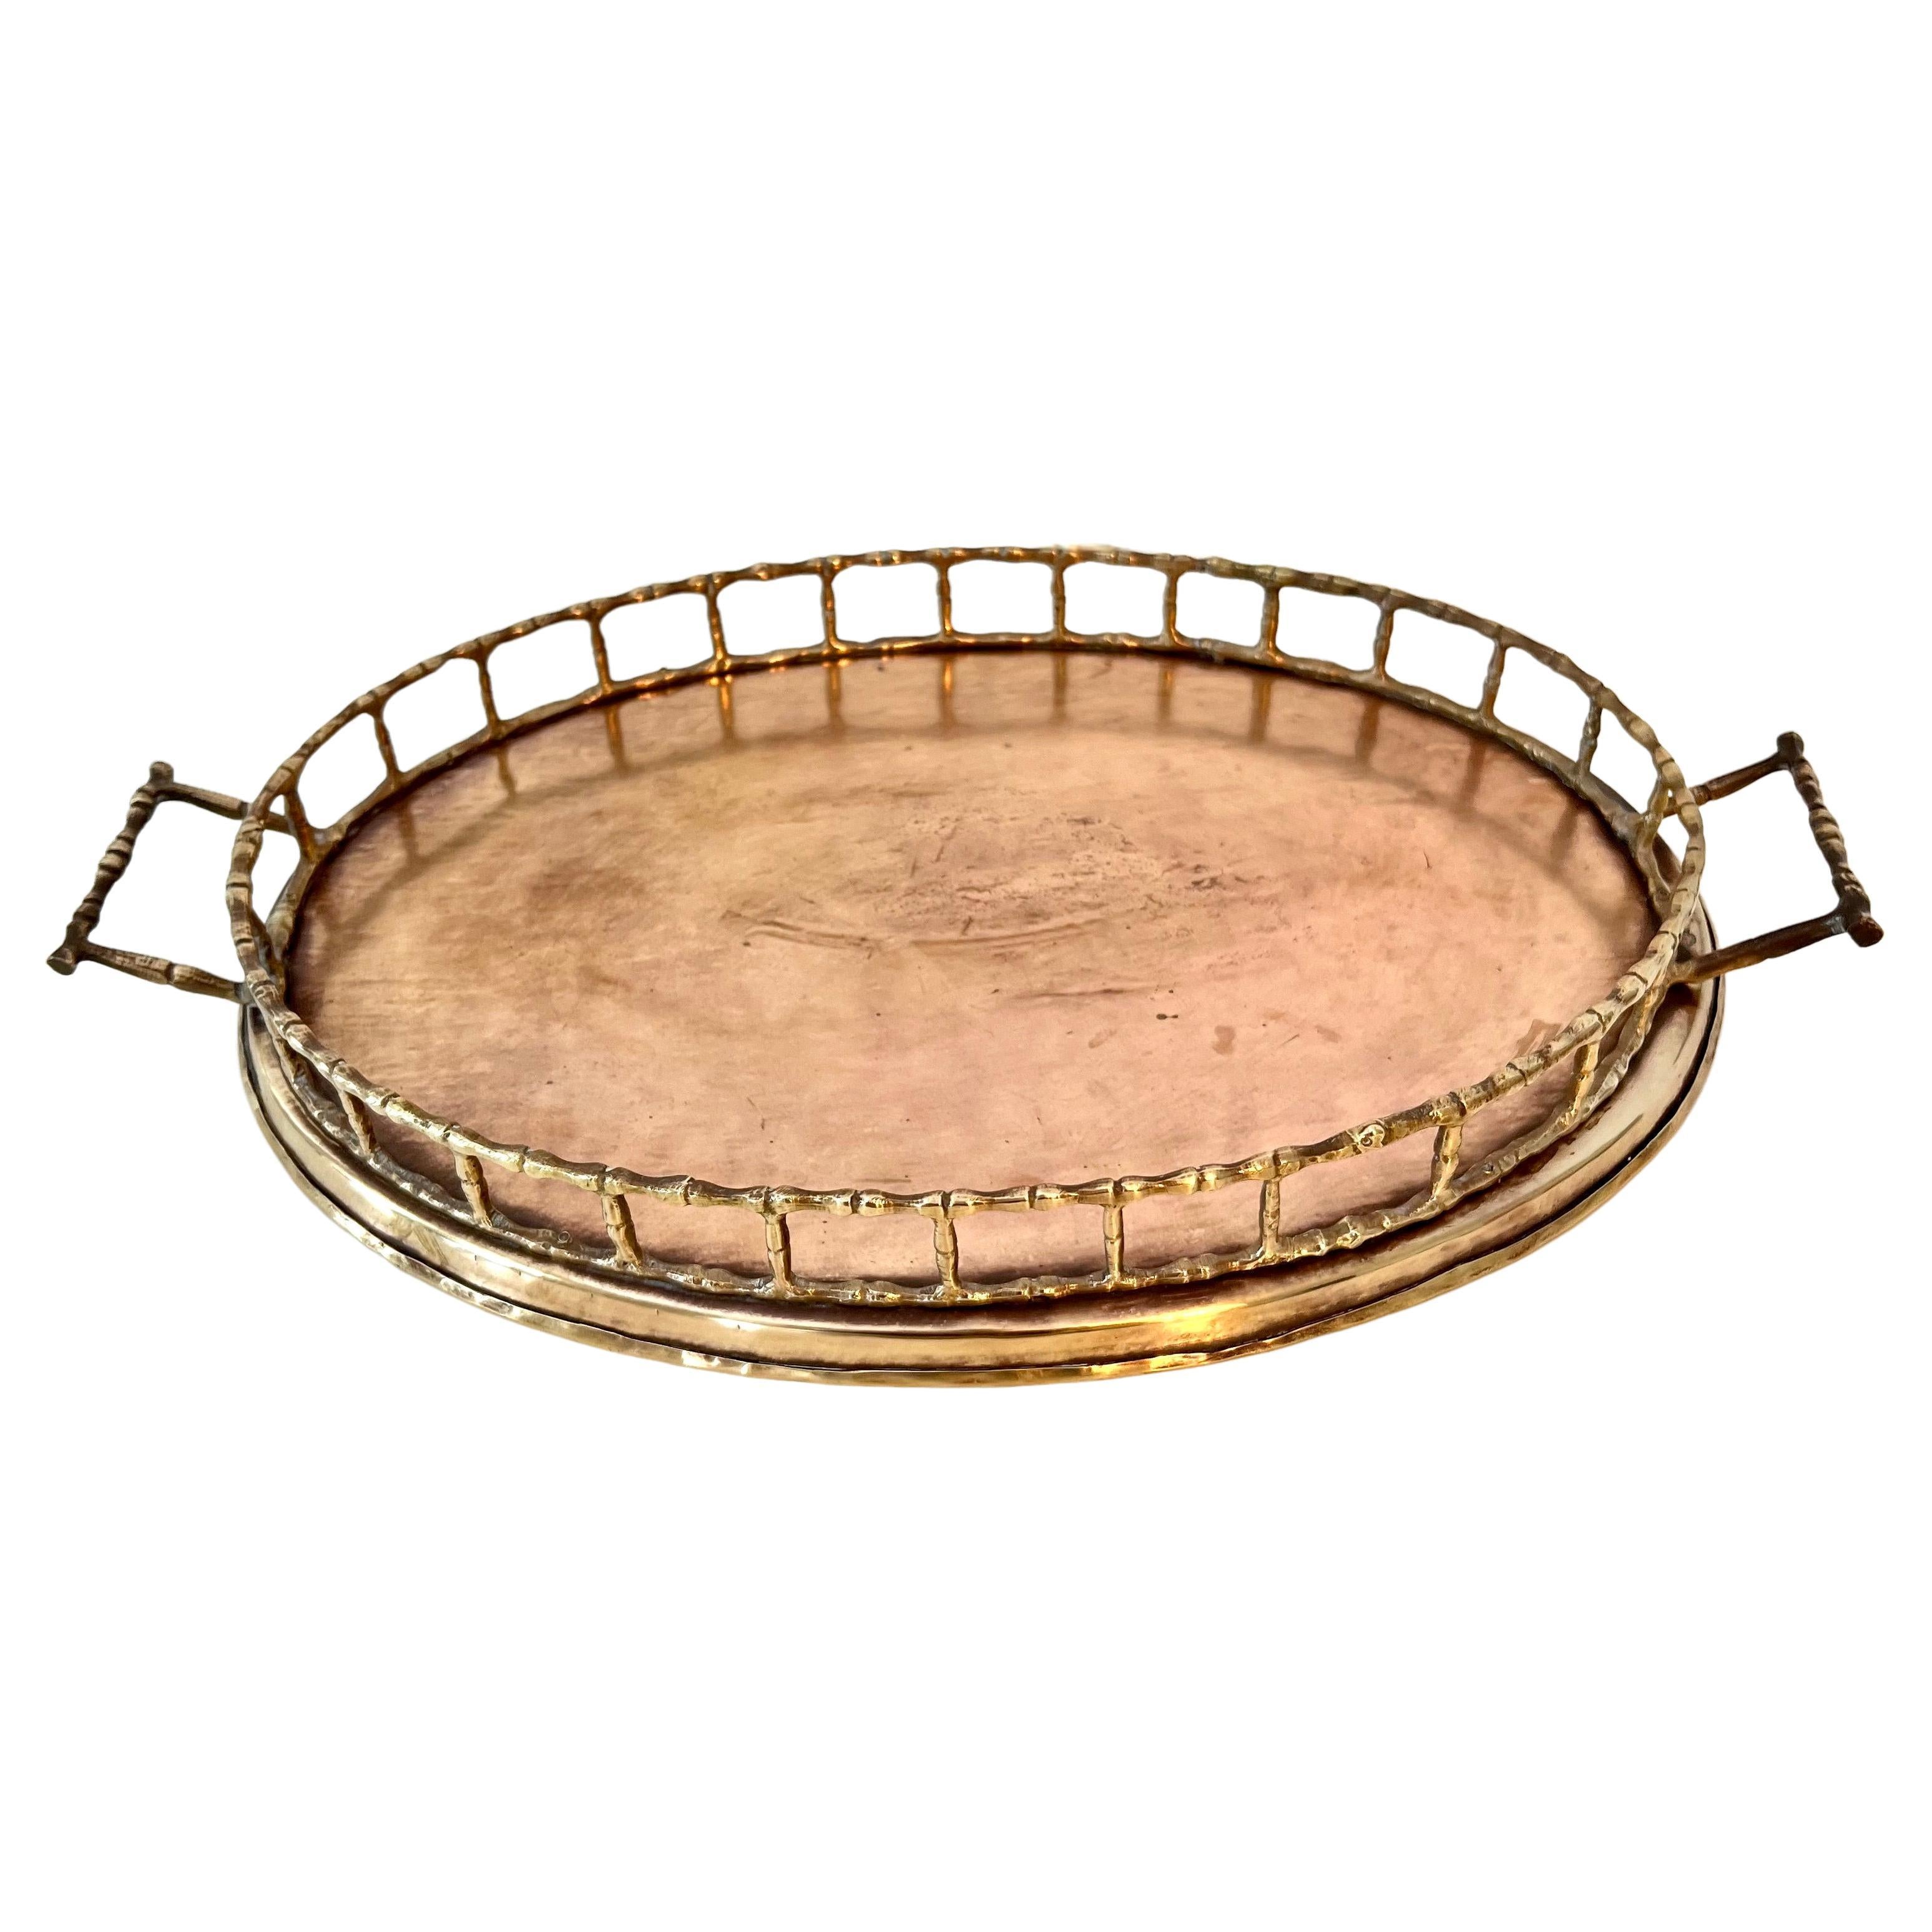 A wonderful round tray with handles in done in the shape of bamboo - a lovely addition to any table or side table as a center piece or serving tray. Also a compliment to any bar for serving cocktails and appetizers.

A nice decorative piece